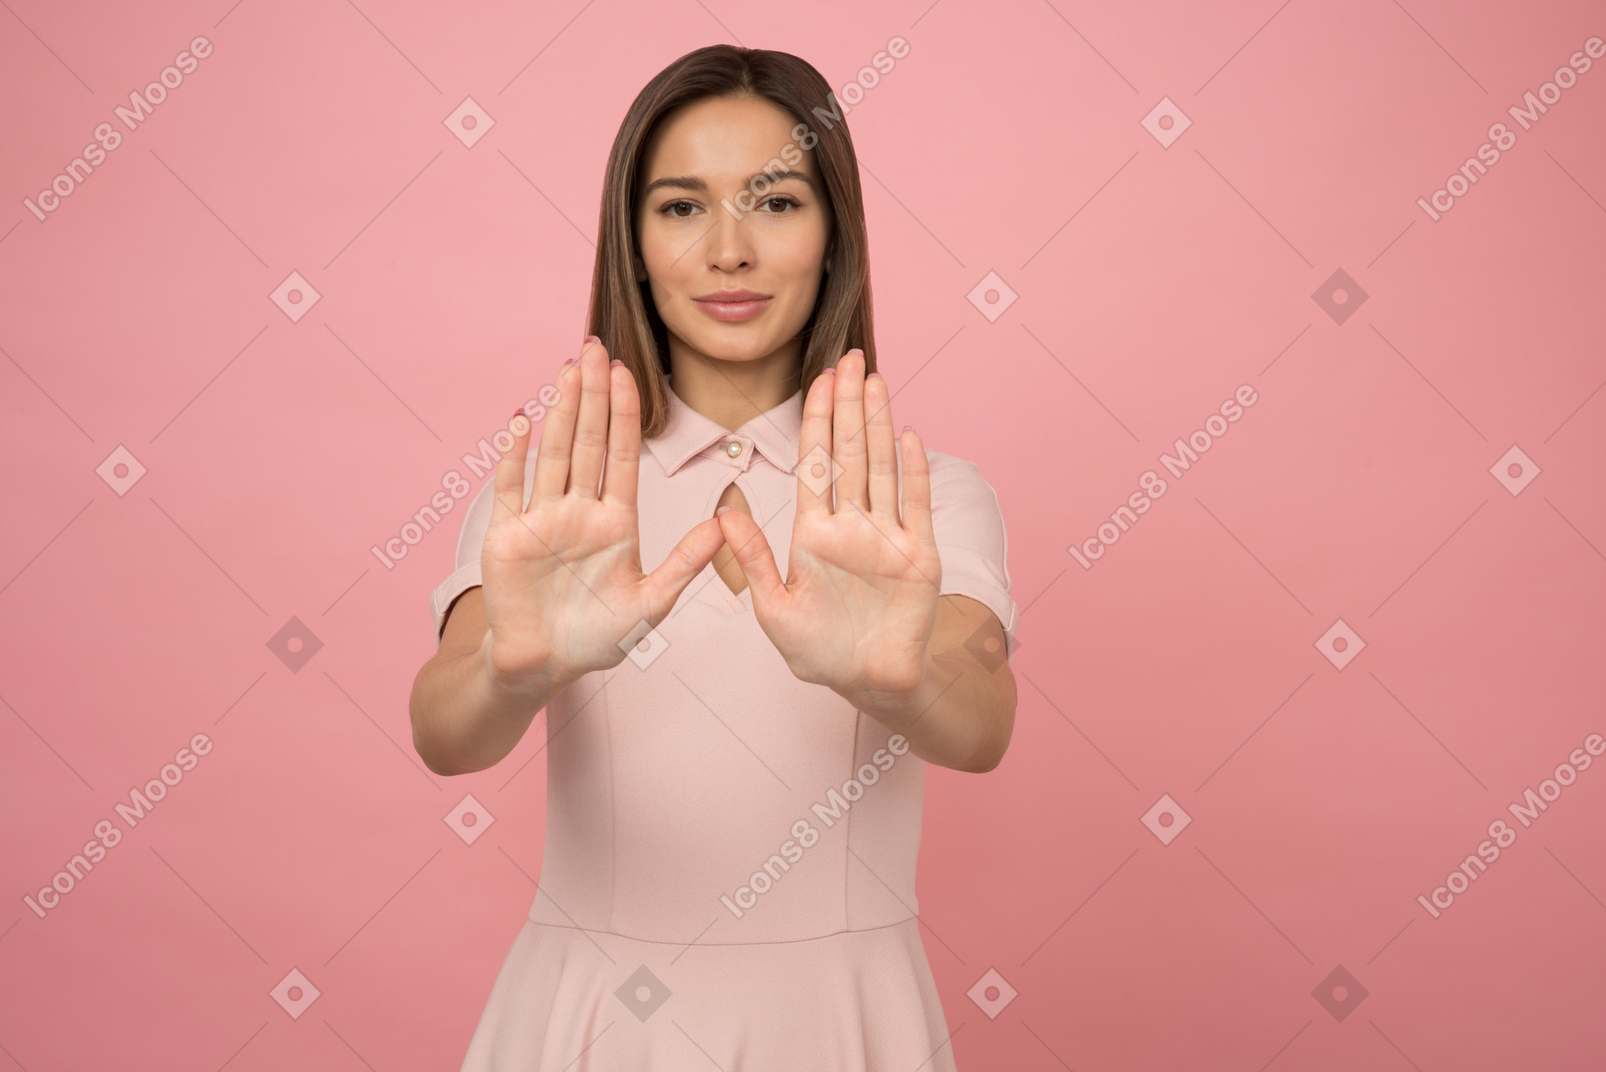 Girl holding her arms elongated